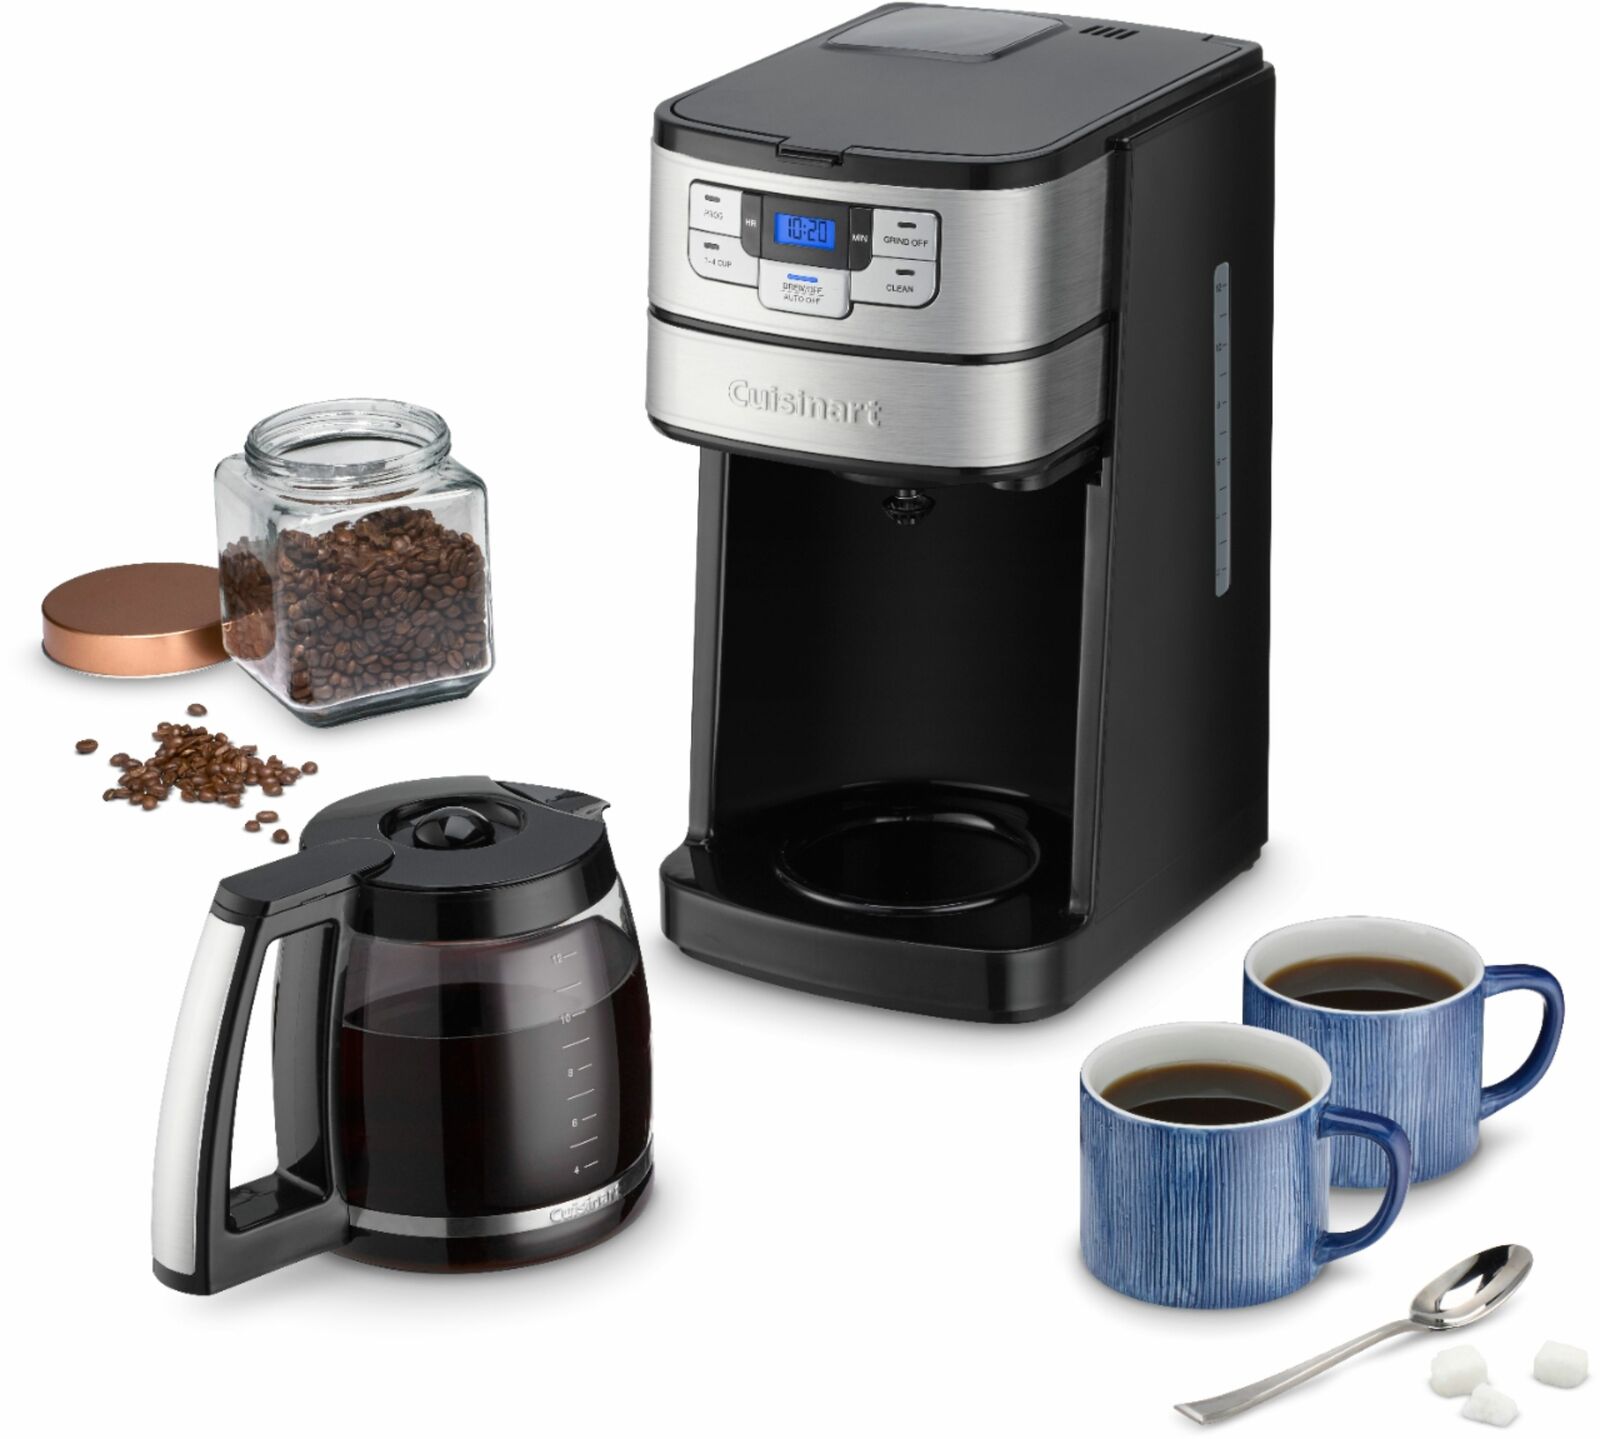 Cuisinart - Automatic Grind and Brew 12 Cup Coffeemaker - Black/Stainless Steel